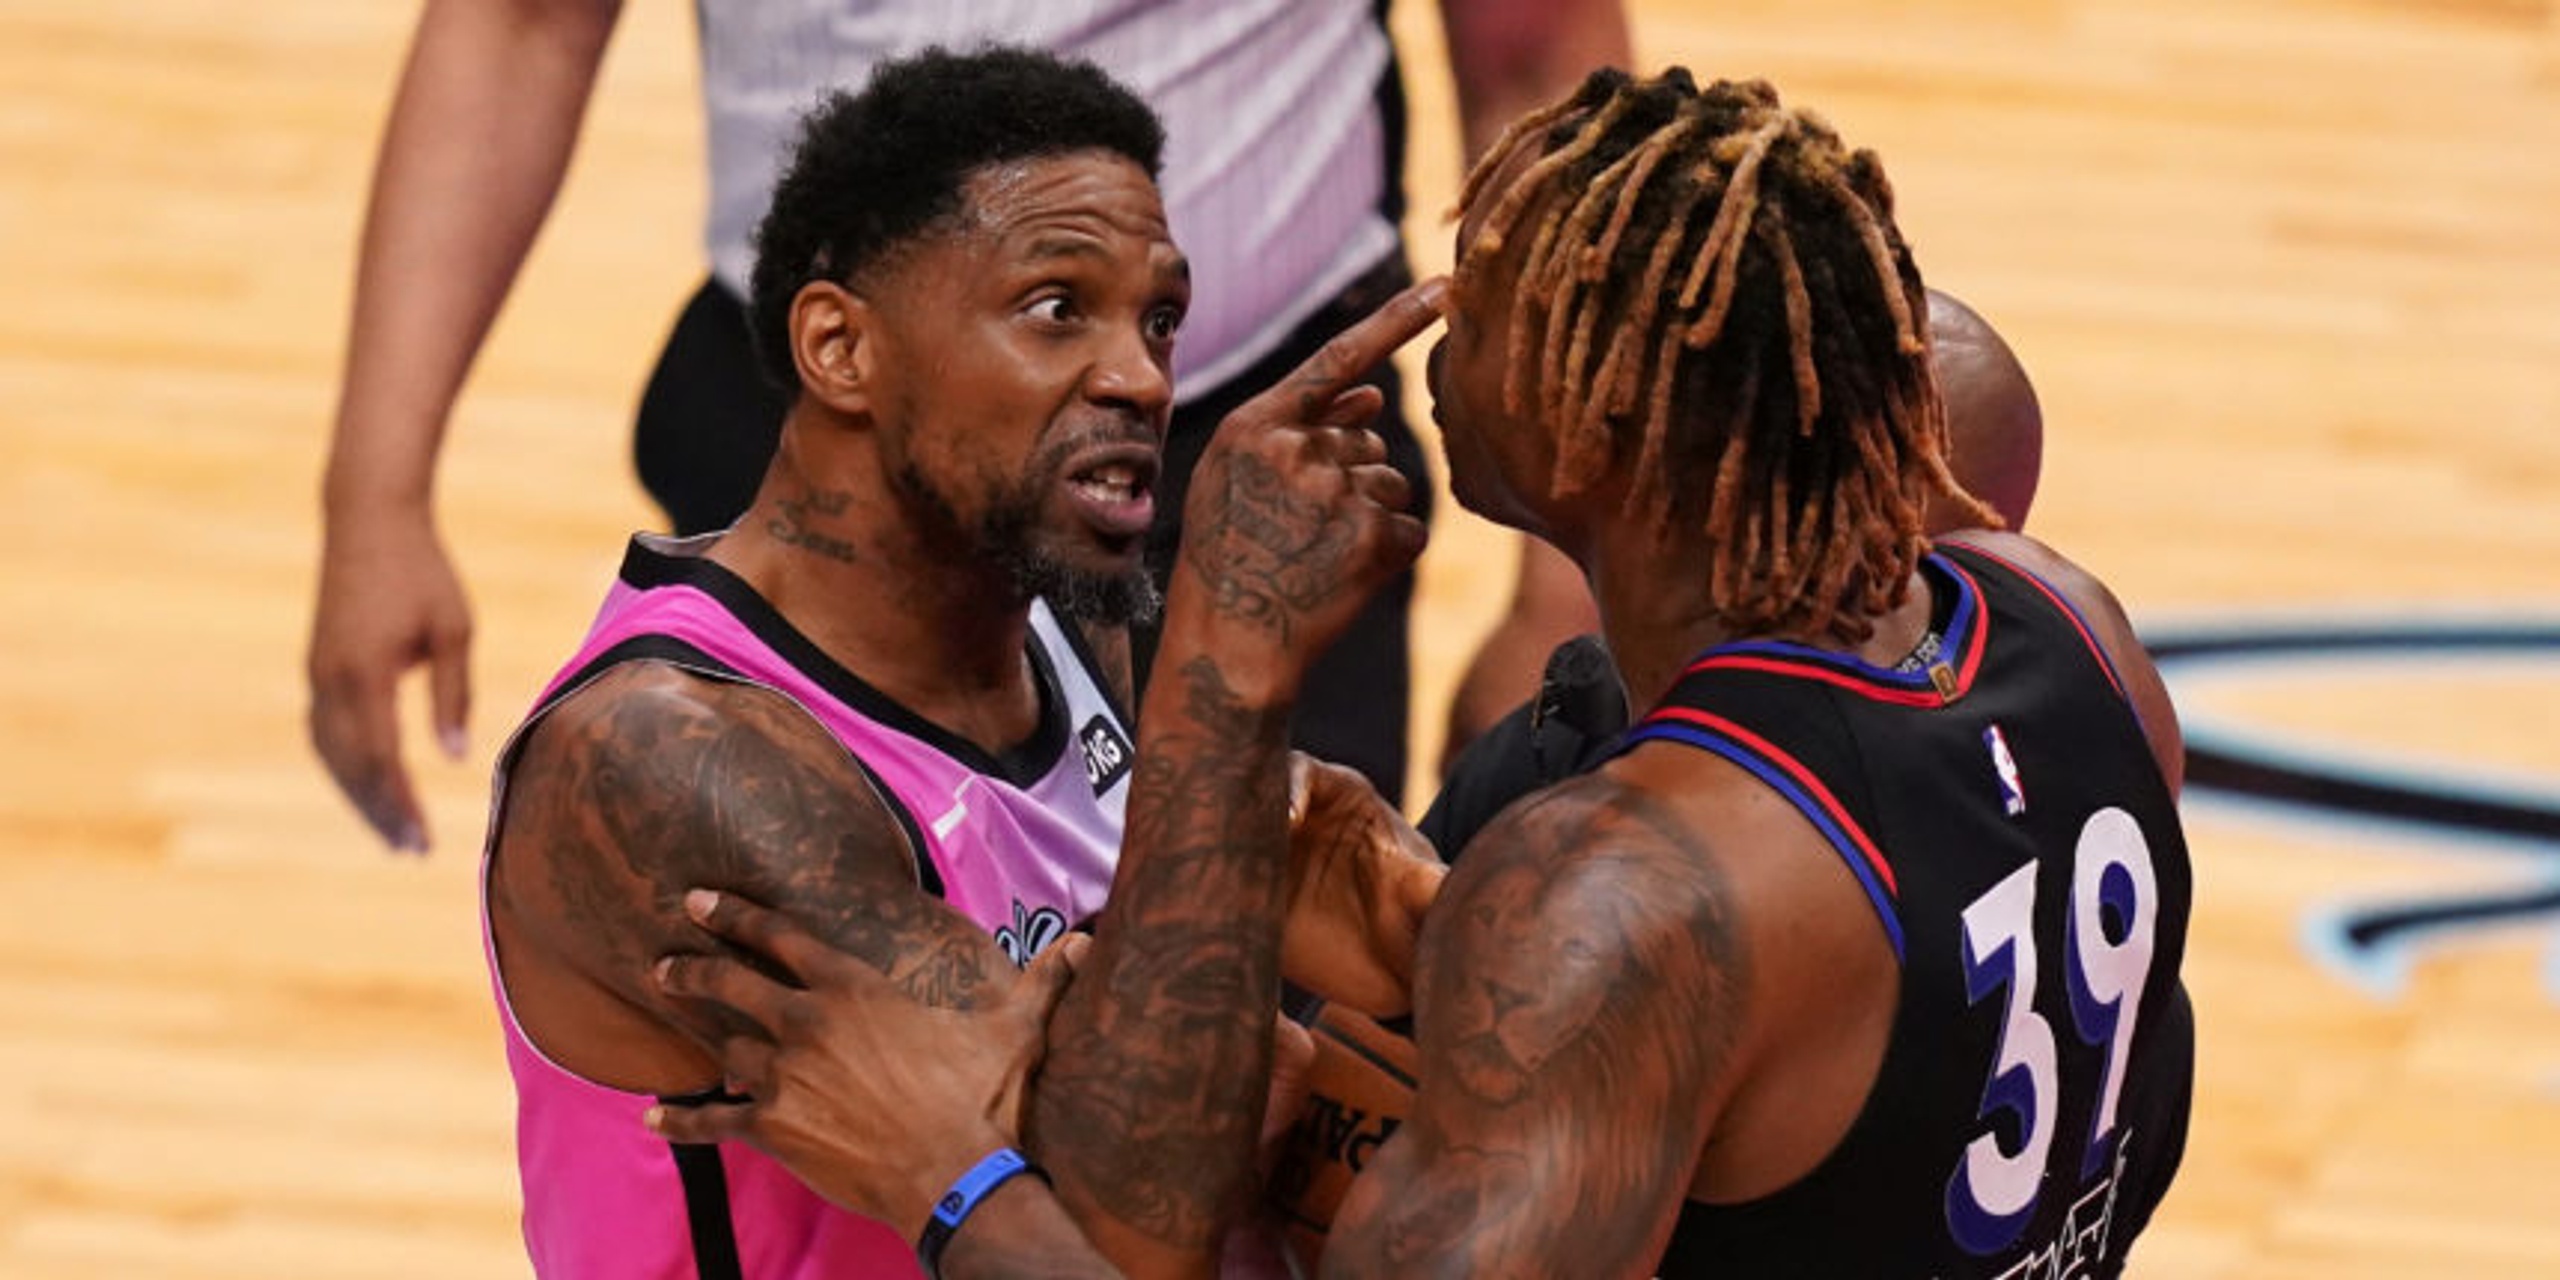 The captain: Haslem makes season debut, scores, gets ejected